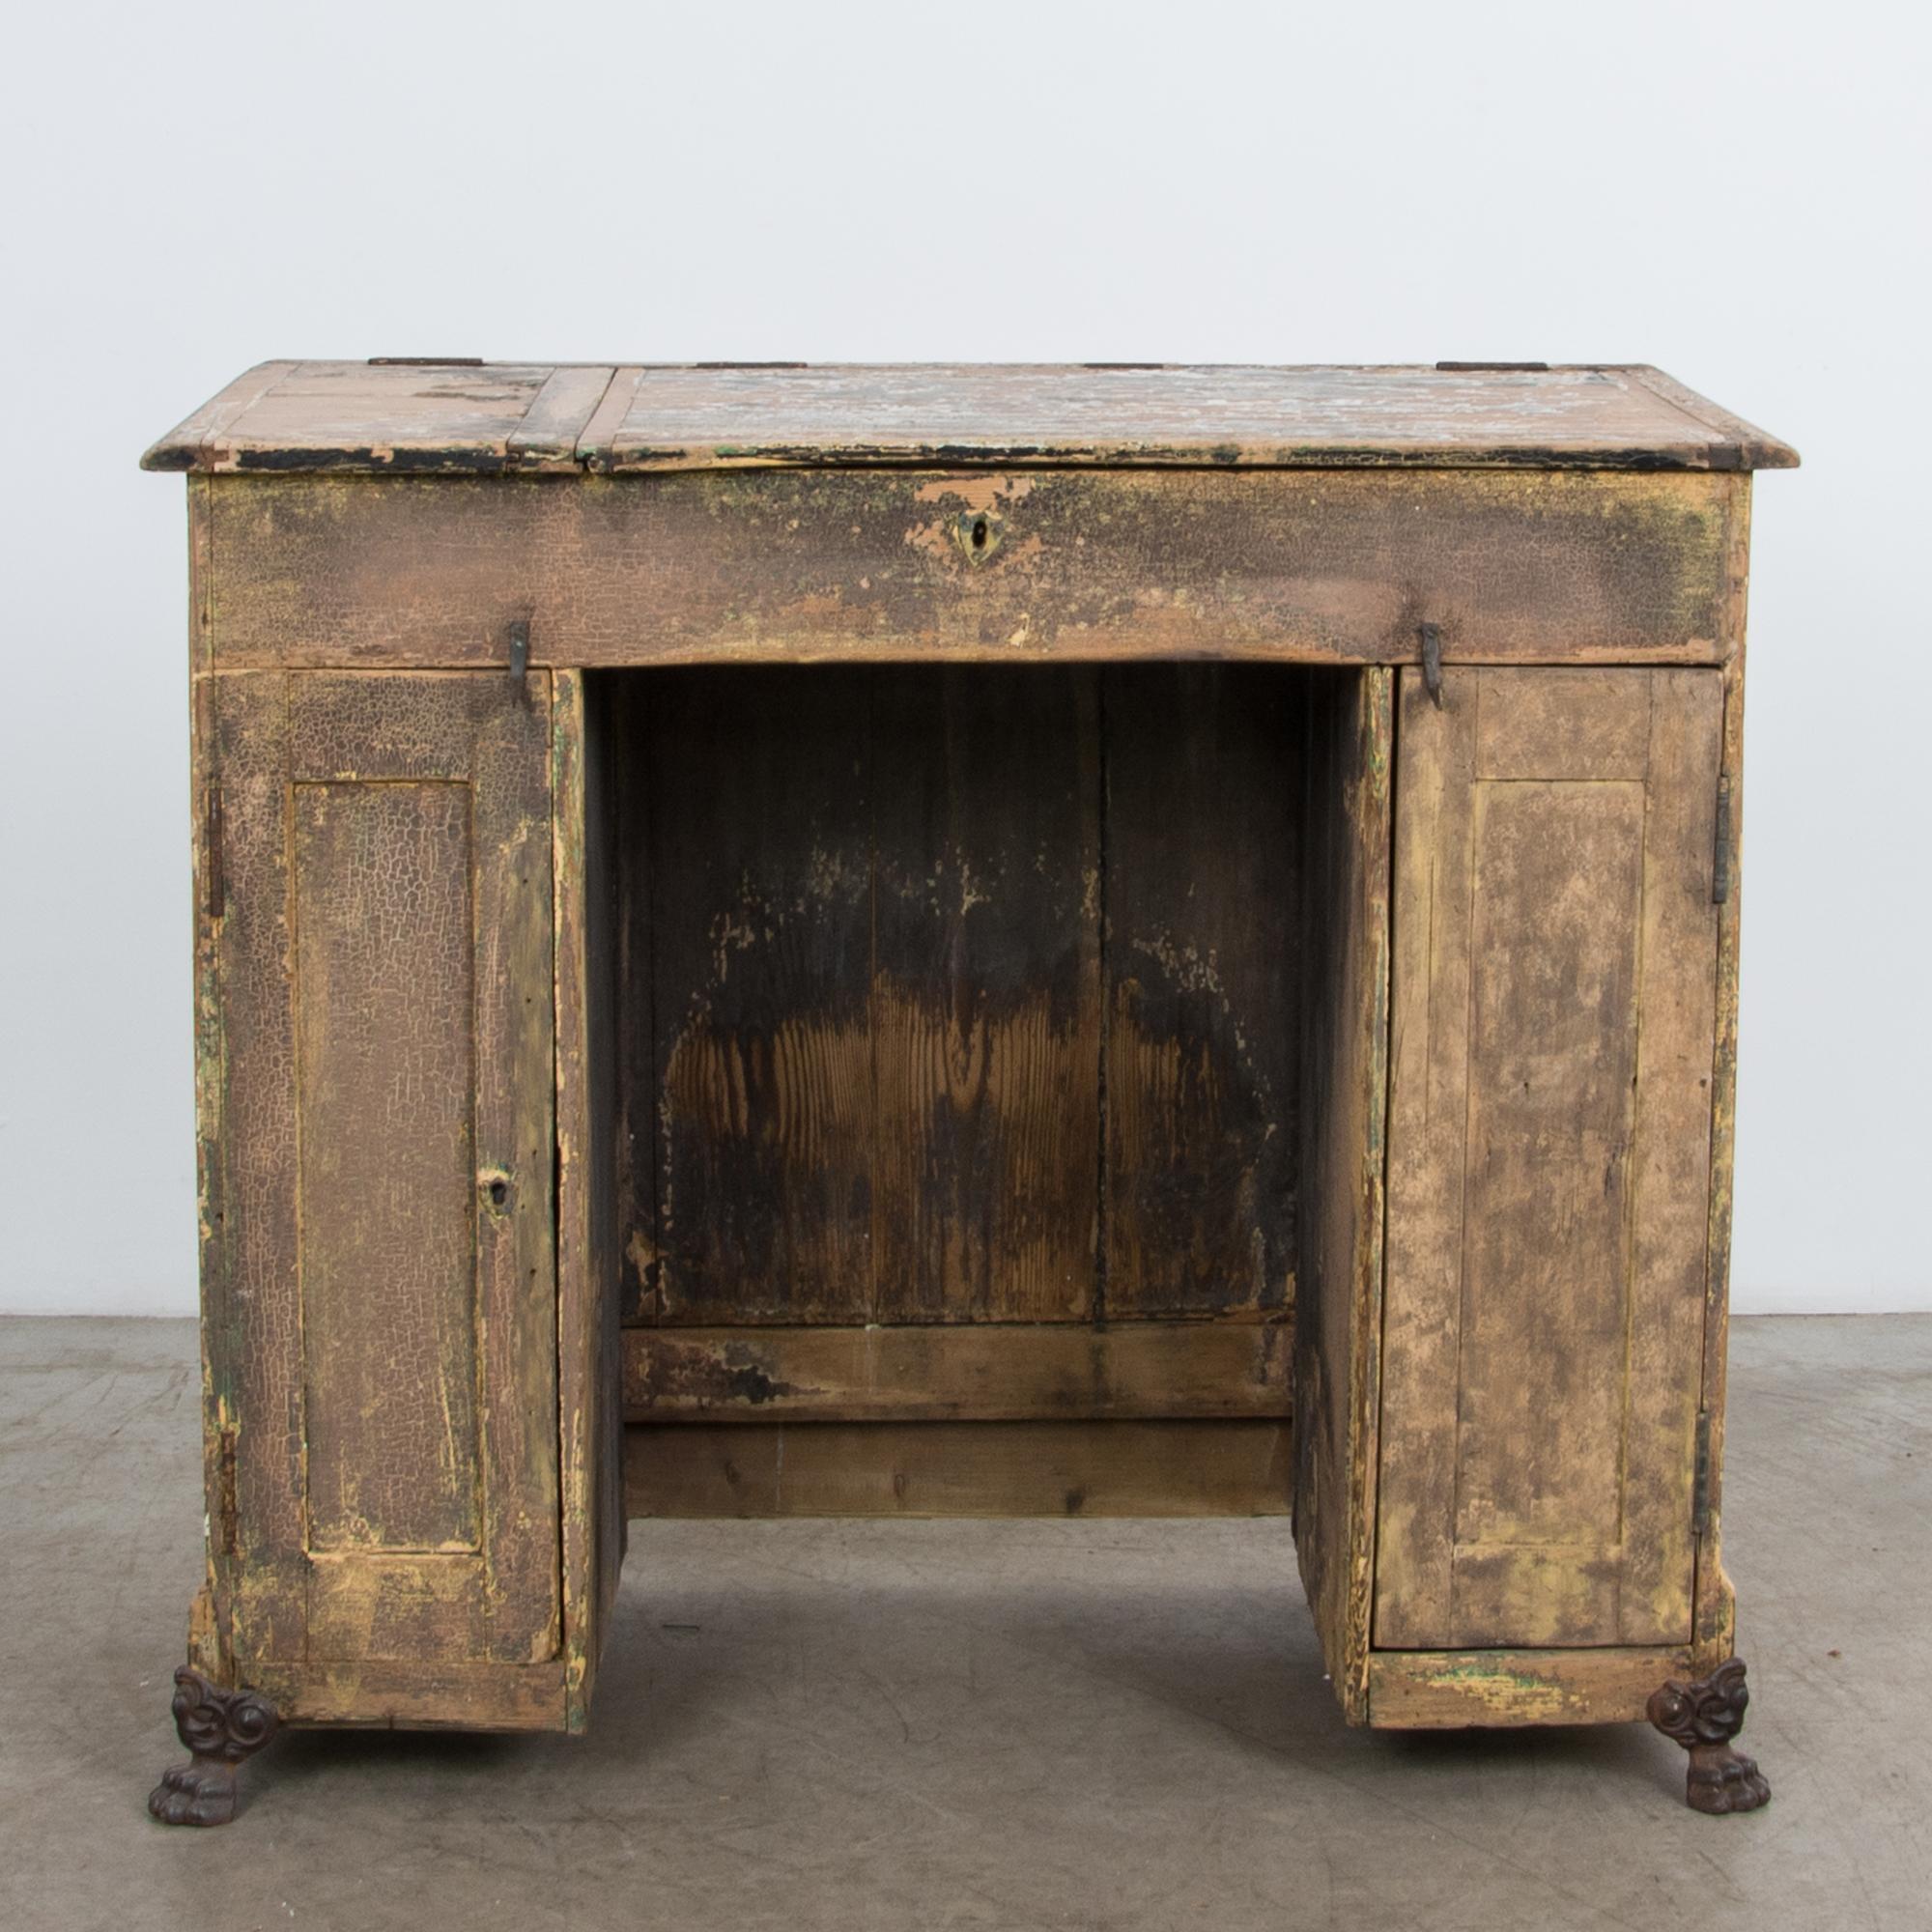 A compact desk with flip top storage space and two doors. From turn of the century France, a beautiful rustic patina is complimented by wrought iron hardware and cast iron clawfeet. Charming construction follows the tradition of regional French